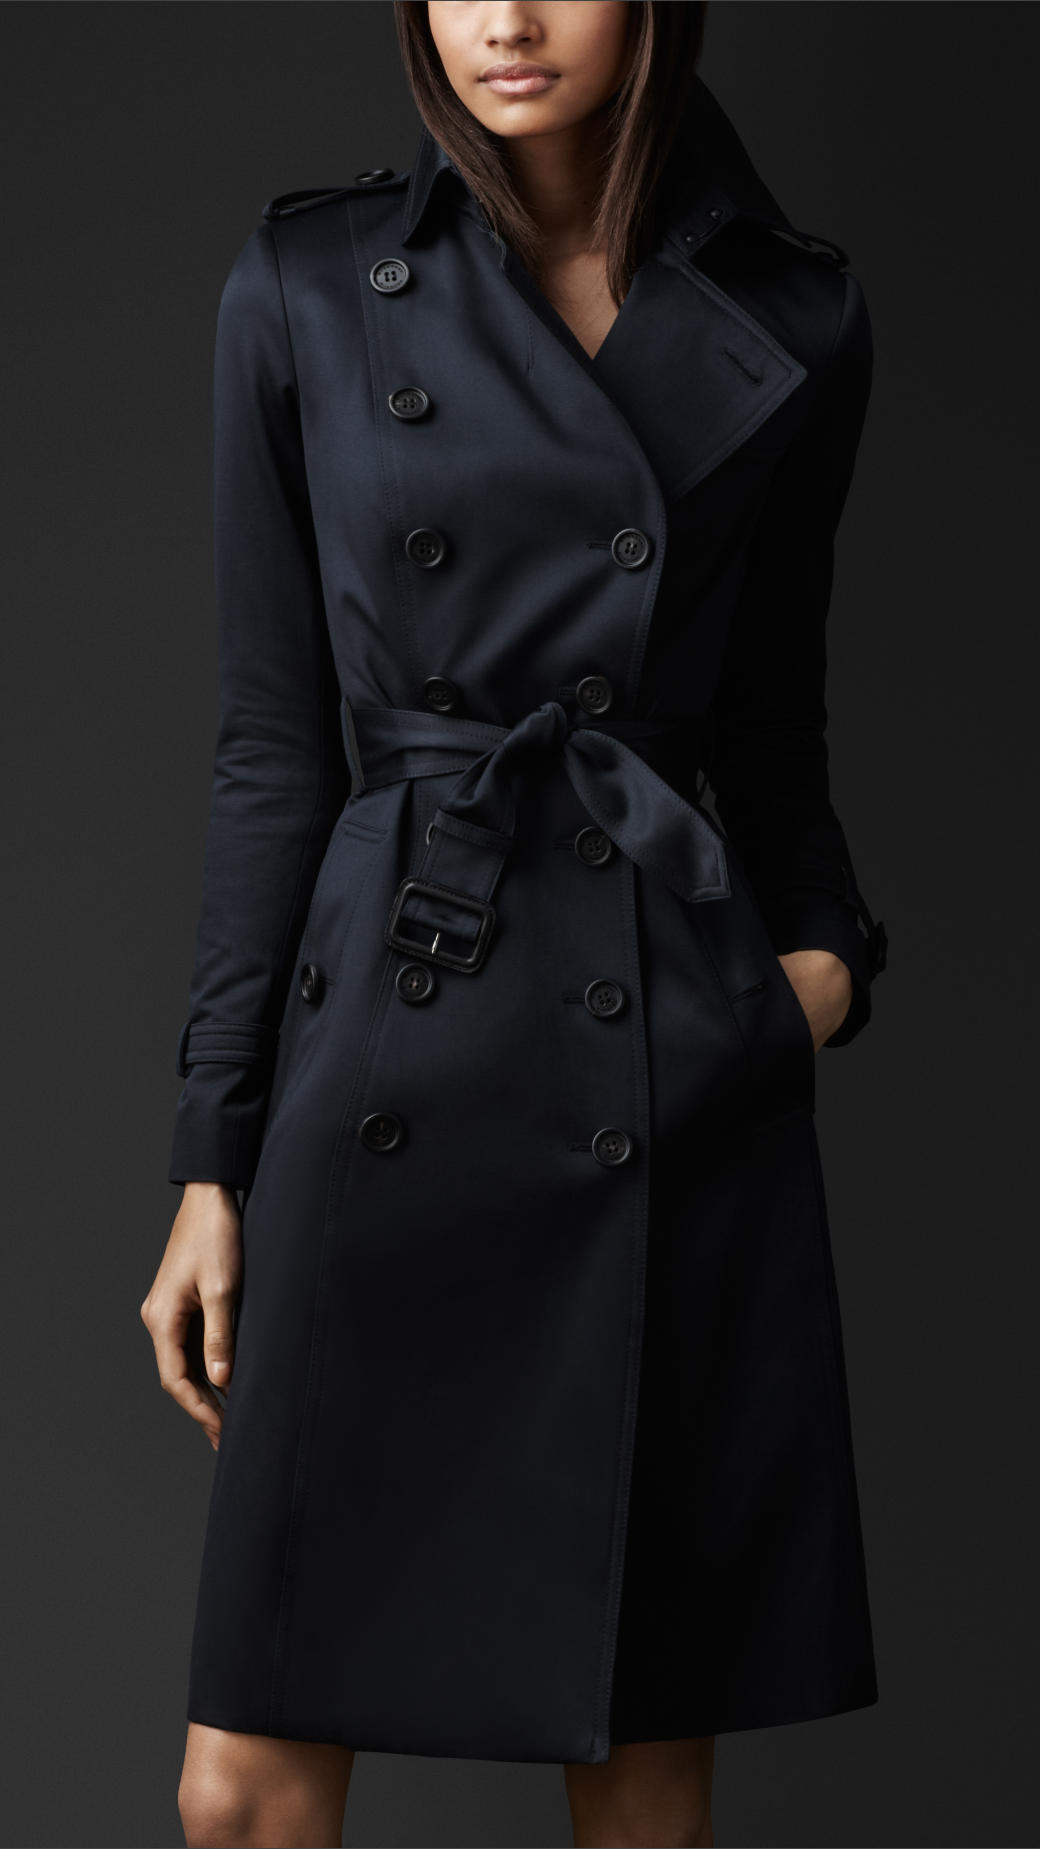 Lyst - Burberry Prorsum Cotton Sateen Trench Coat in Blue